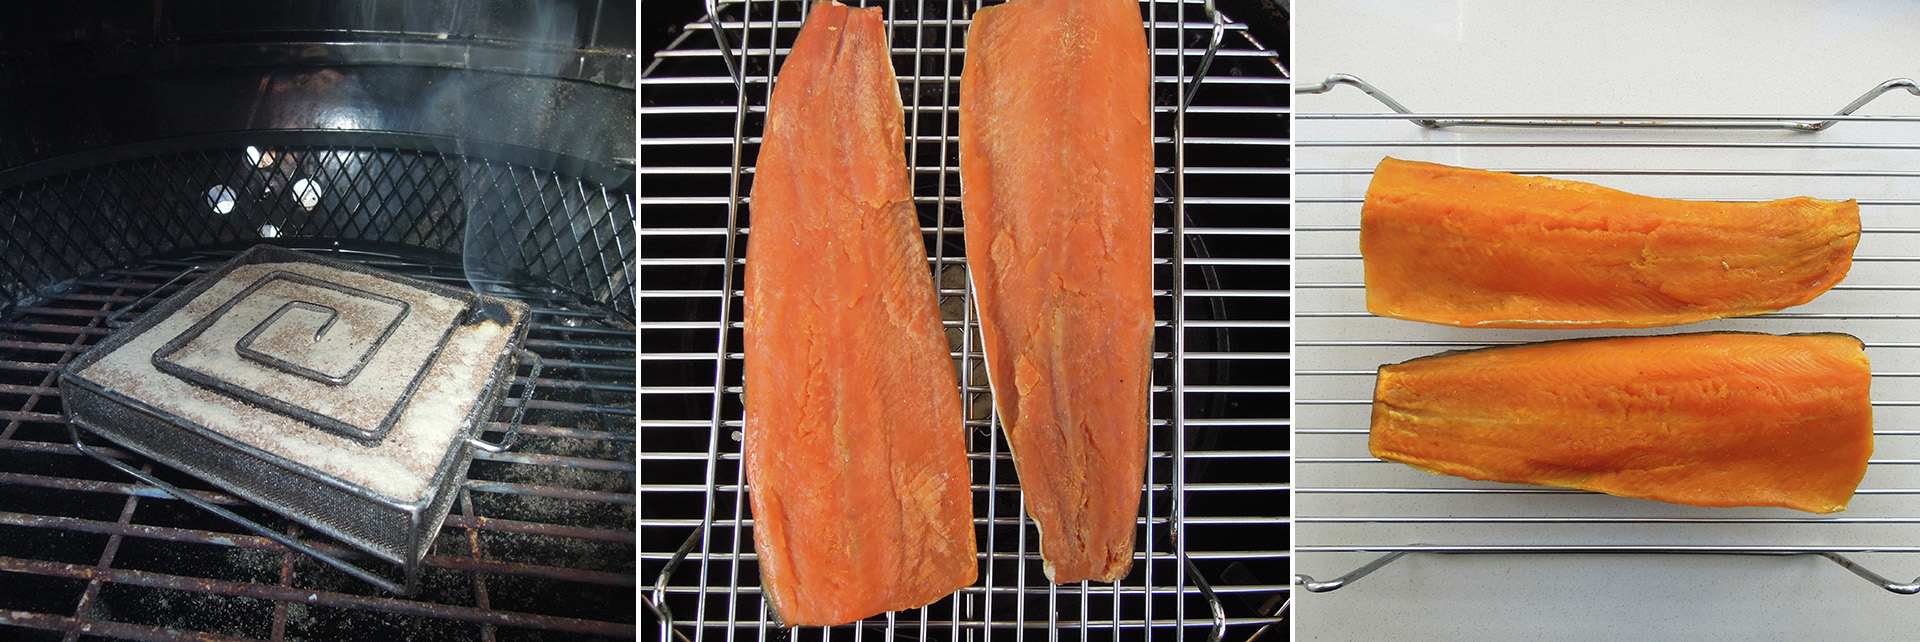 Cold smoked trout with Asian spices